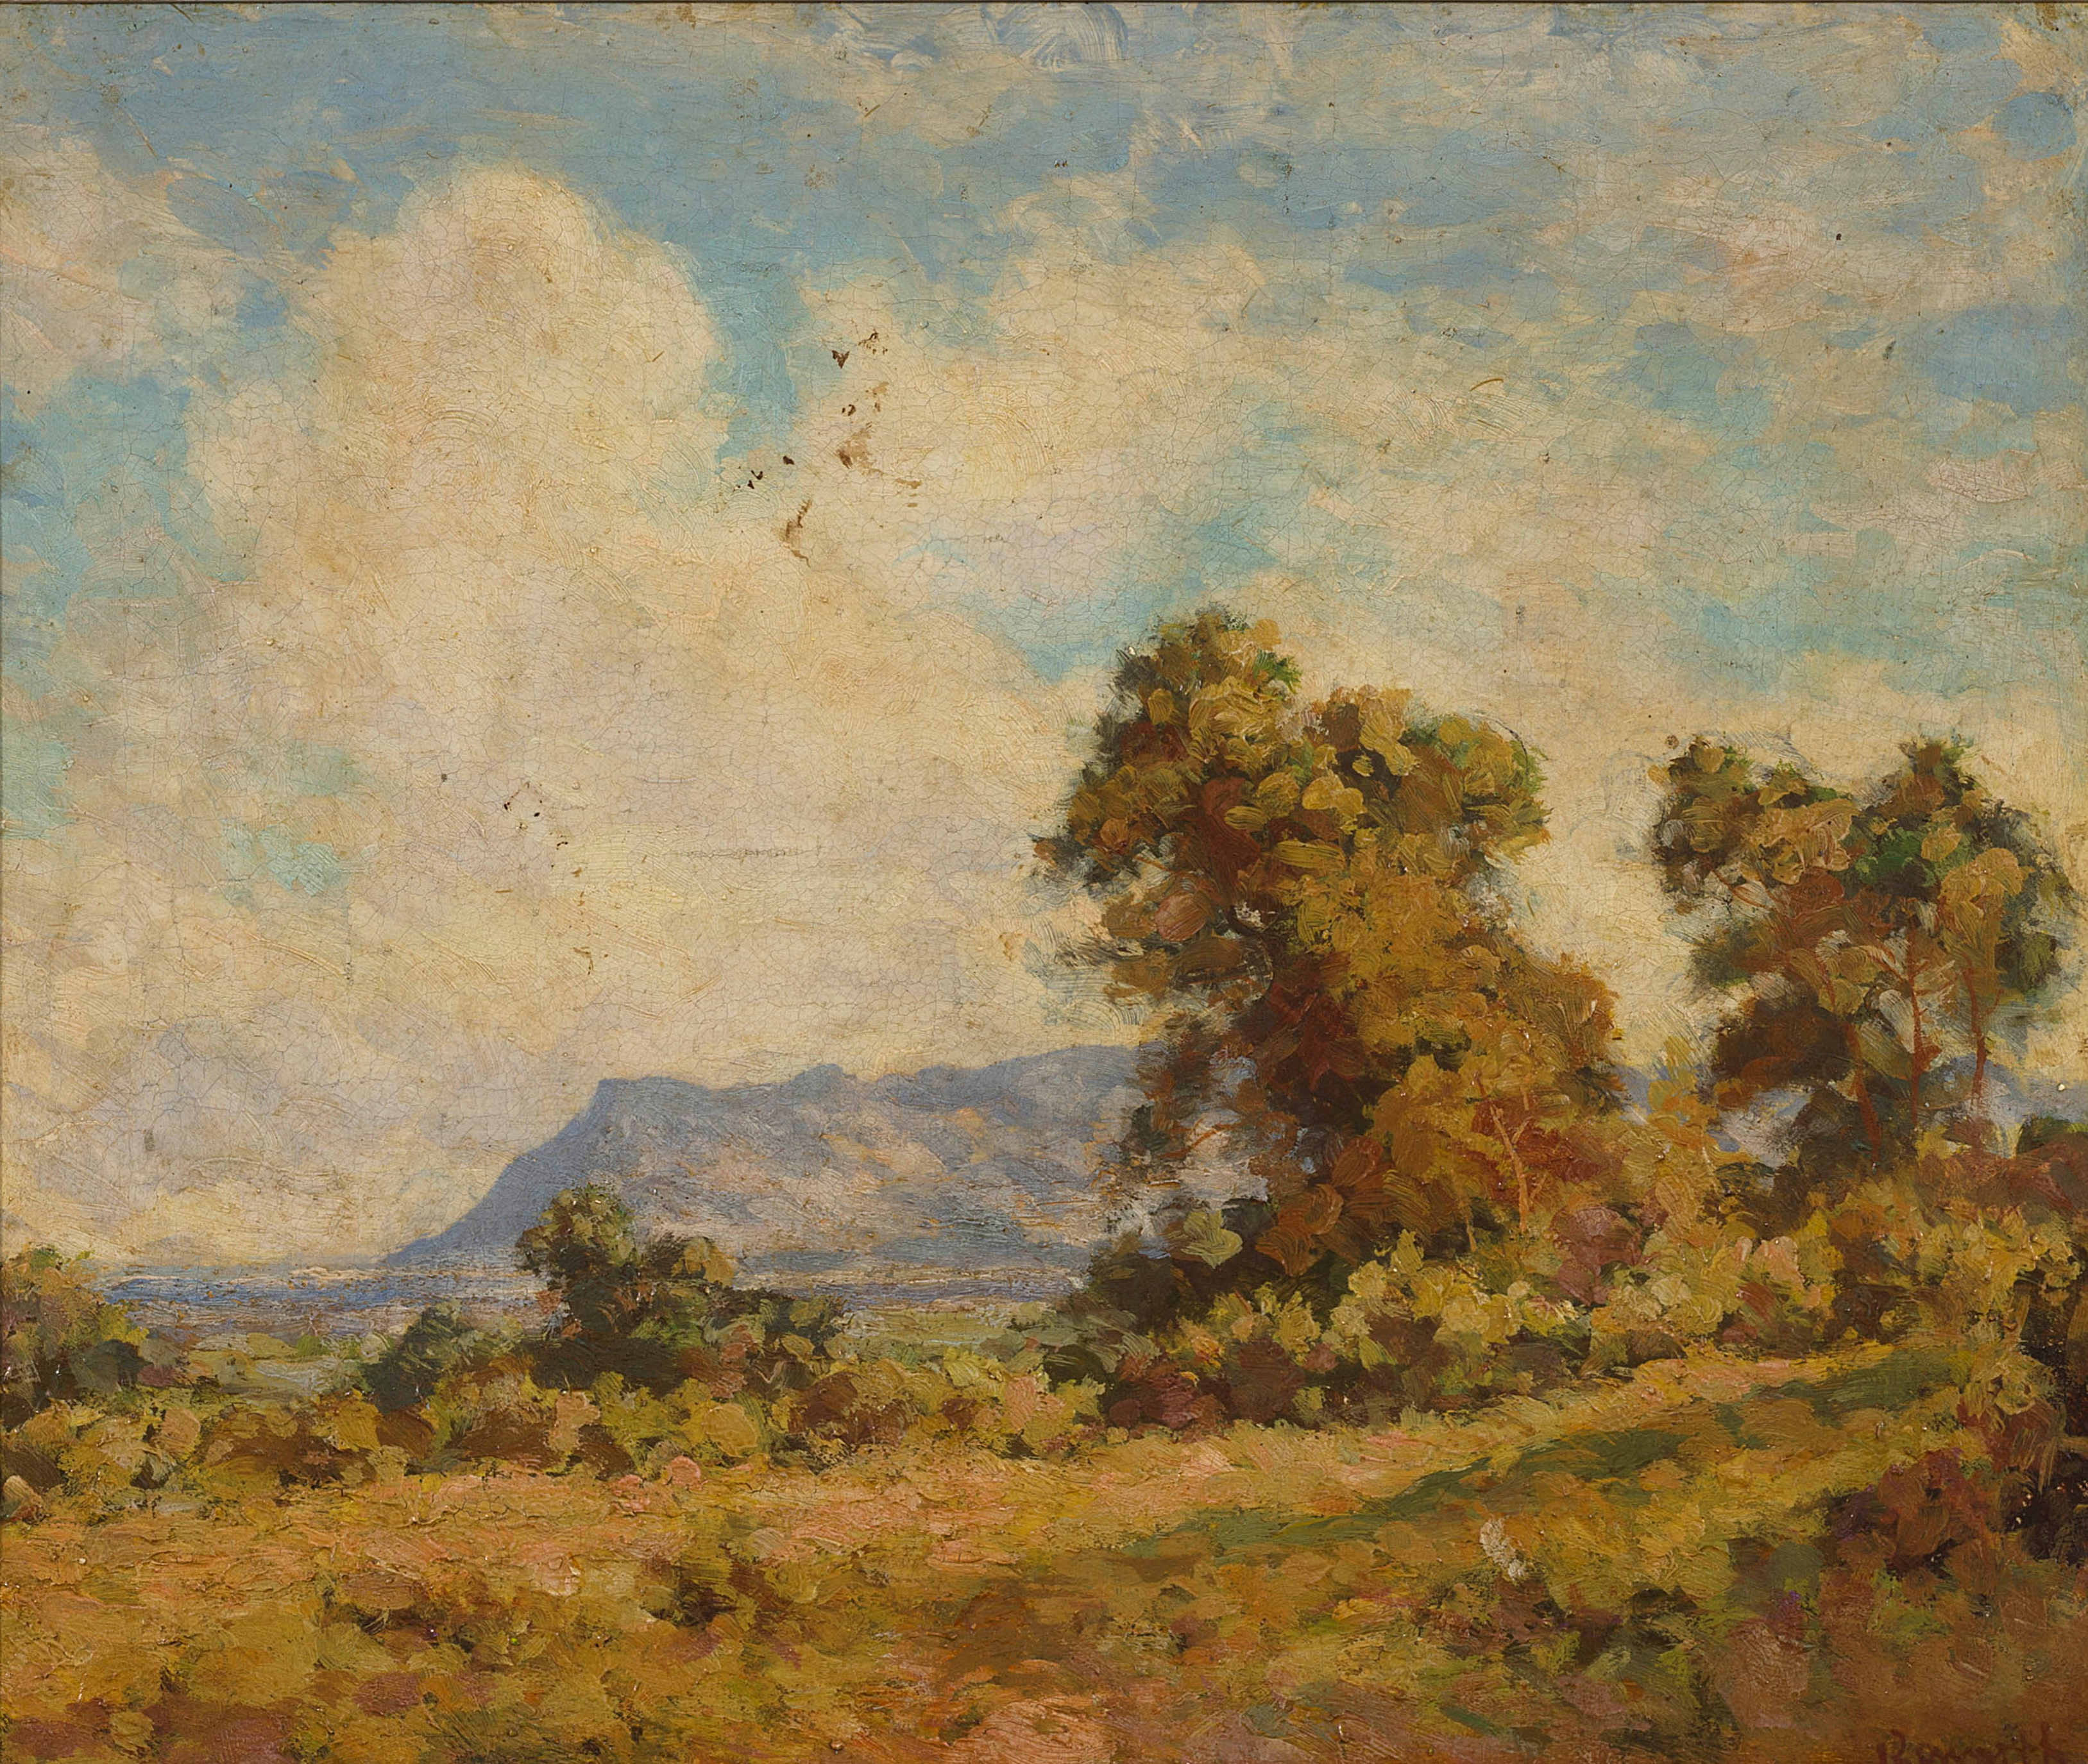 Edward Roworth; A View of Constantia